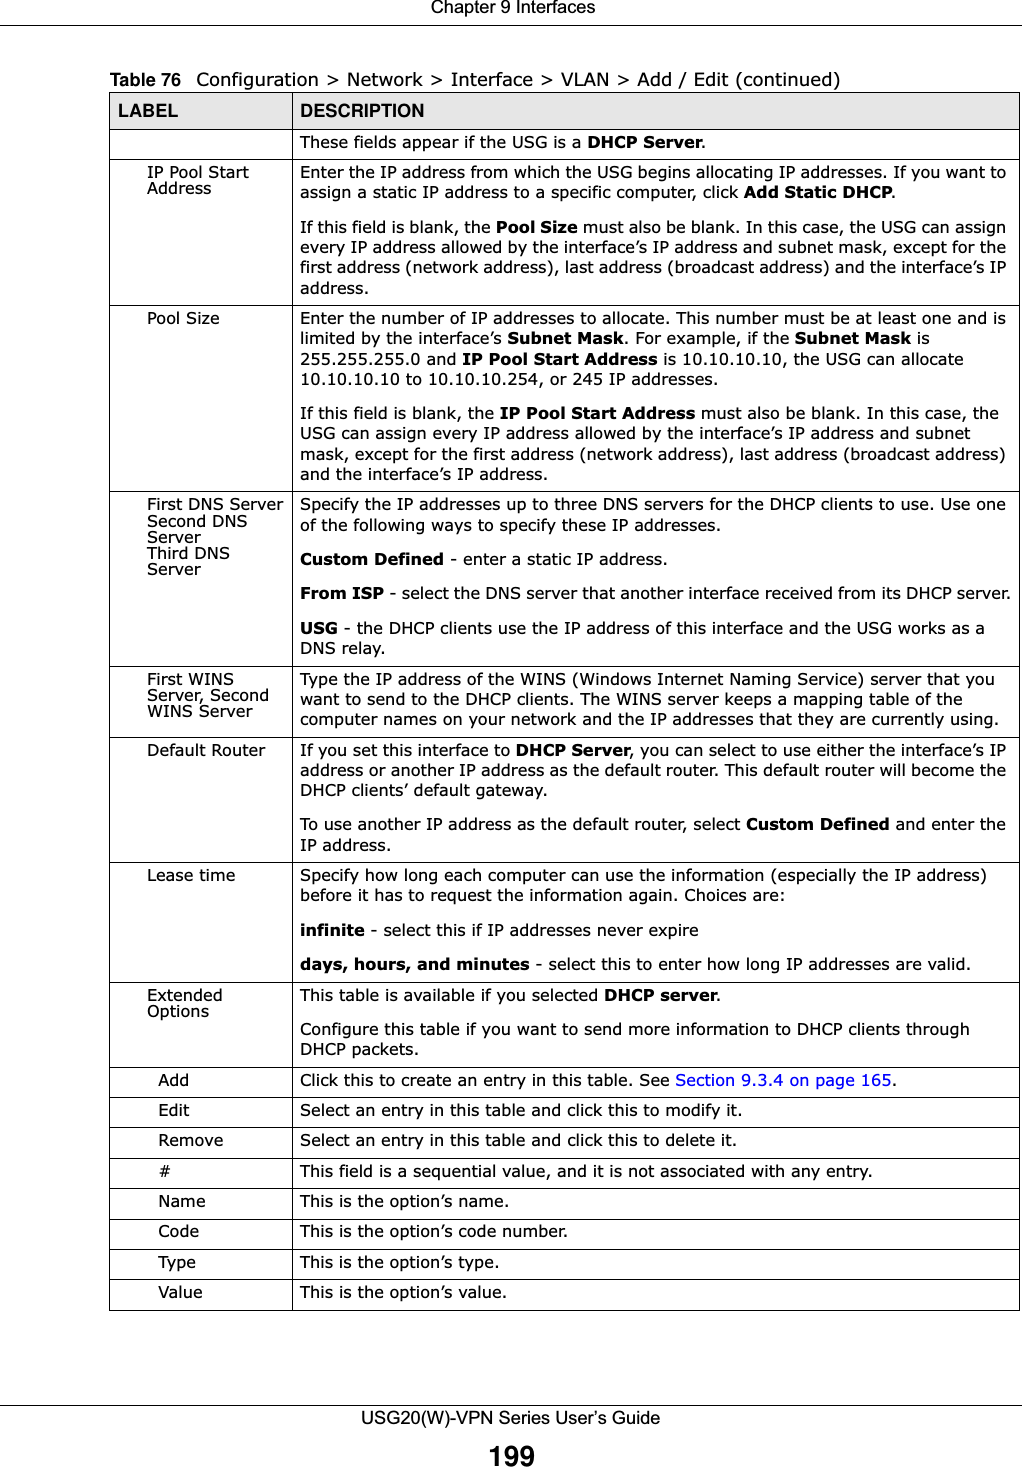  Chapter 9 InterfacesUSG20(W)-VPN Series User’s Guide199These fields appear if the USG is a DHCP Server.IP Pool Start Address Enter the IP address from which the USG begins allocating IP addresses. If you want to assign a static IP address to a specific computer, click Add Static DHCP.If this field is blank, the Pool Size must also be blank. In this case, the USG can assign every IP address allowed by the interface’s IP address and subnet mask, except for the first address (network address), last address (broadcast address) and the interface’s IP address.Pool Size Enter the number of IP addresses to allocate. This number must be at least one and is limited by the interface’s Subnet Mask. For example, if the Subnet Mask is 255.255.255.0 and IP Pool Start Address is 10.10.10.10, the USG can allocate 10.10.10.10 to 10.10.10.254, or 245 IP addresses.If this field is blank, the IP Pool Start Address must also be blank. In this case, the USG can assign every IP address allowed by the interface’s IP address and subnet mask, except for the first address (network address), last address (broadcast address) and the interface’s IP address.First DNS ServerSecond DNS ServerThird DNS ServerSpecify the IP addresses up to three DNS servers for the DHCP clients to use. Use one of the following ways to specify these IP addresses.Custom Defined - enter a static IP address.From ISP - select the DNS server that another interface received from its DHCP server.USG - the DHCP clients use the IP address of this interface and the USG works as a DNS relay.First WINS Server, Second WINS Server Type the IP address of the WINS (Windows Internet Naming Service) server that you want to send to the DHCP clients. The WINS server keeps a mapping table of the computer names on your network and the IP addresses that they are currently using.  Default Router If you set this interface to DHCP Server, you can select to use either the interface’s IP address or another IP address as the default router. This default router will become the DHCP clients’ default gateway.To use another IP address as the default router, select Custom Defined and enter the IP address.Lease time Specify how long each computer can use the information (especially the IP address) before it has to request the information again. Choices are:infinite - select this if IP addresses never expiredays, hours, and minutes - select this to enter how long IP addresses are valid.Extended Options This table is available if you selected DHCP server.Configure this table if you want to send more information to DHCP clients through DHCP packets.  Add Click this to create an entry in this table. See Section 9.3.4 on page 165.  Edit Select an entry in this table and click this to modify it.  Remove Select an entry in this table and click this to delete it.  # This field is a sequential value, and it is not associated with any entry.  Name This is the option’s name.  Code This is the option’s code number.  Type This is the option’s type.  Value This is the option’s value.Table 76   Configuration &gt; Network &gt; Interface &gt; VLAN &gt; Add / Edit (continued)LABEL DESCRIPTION